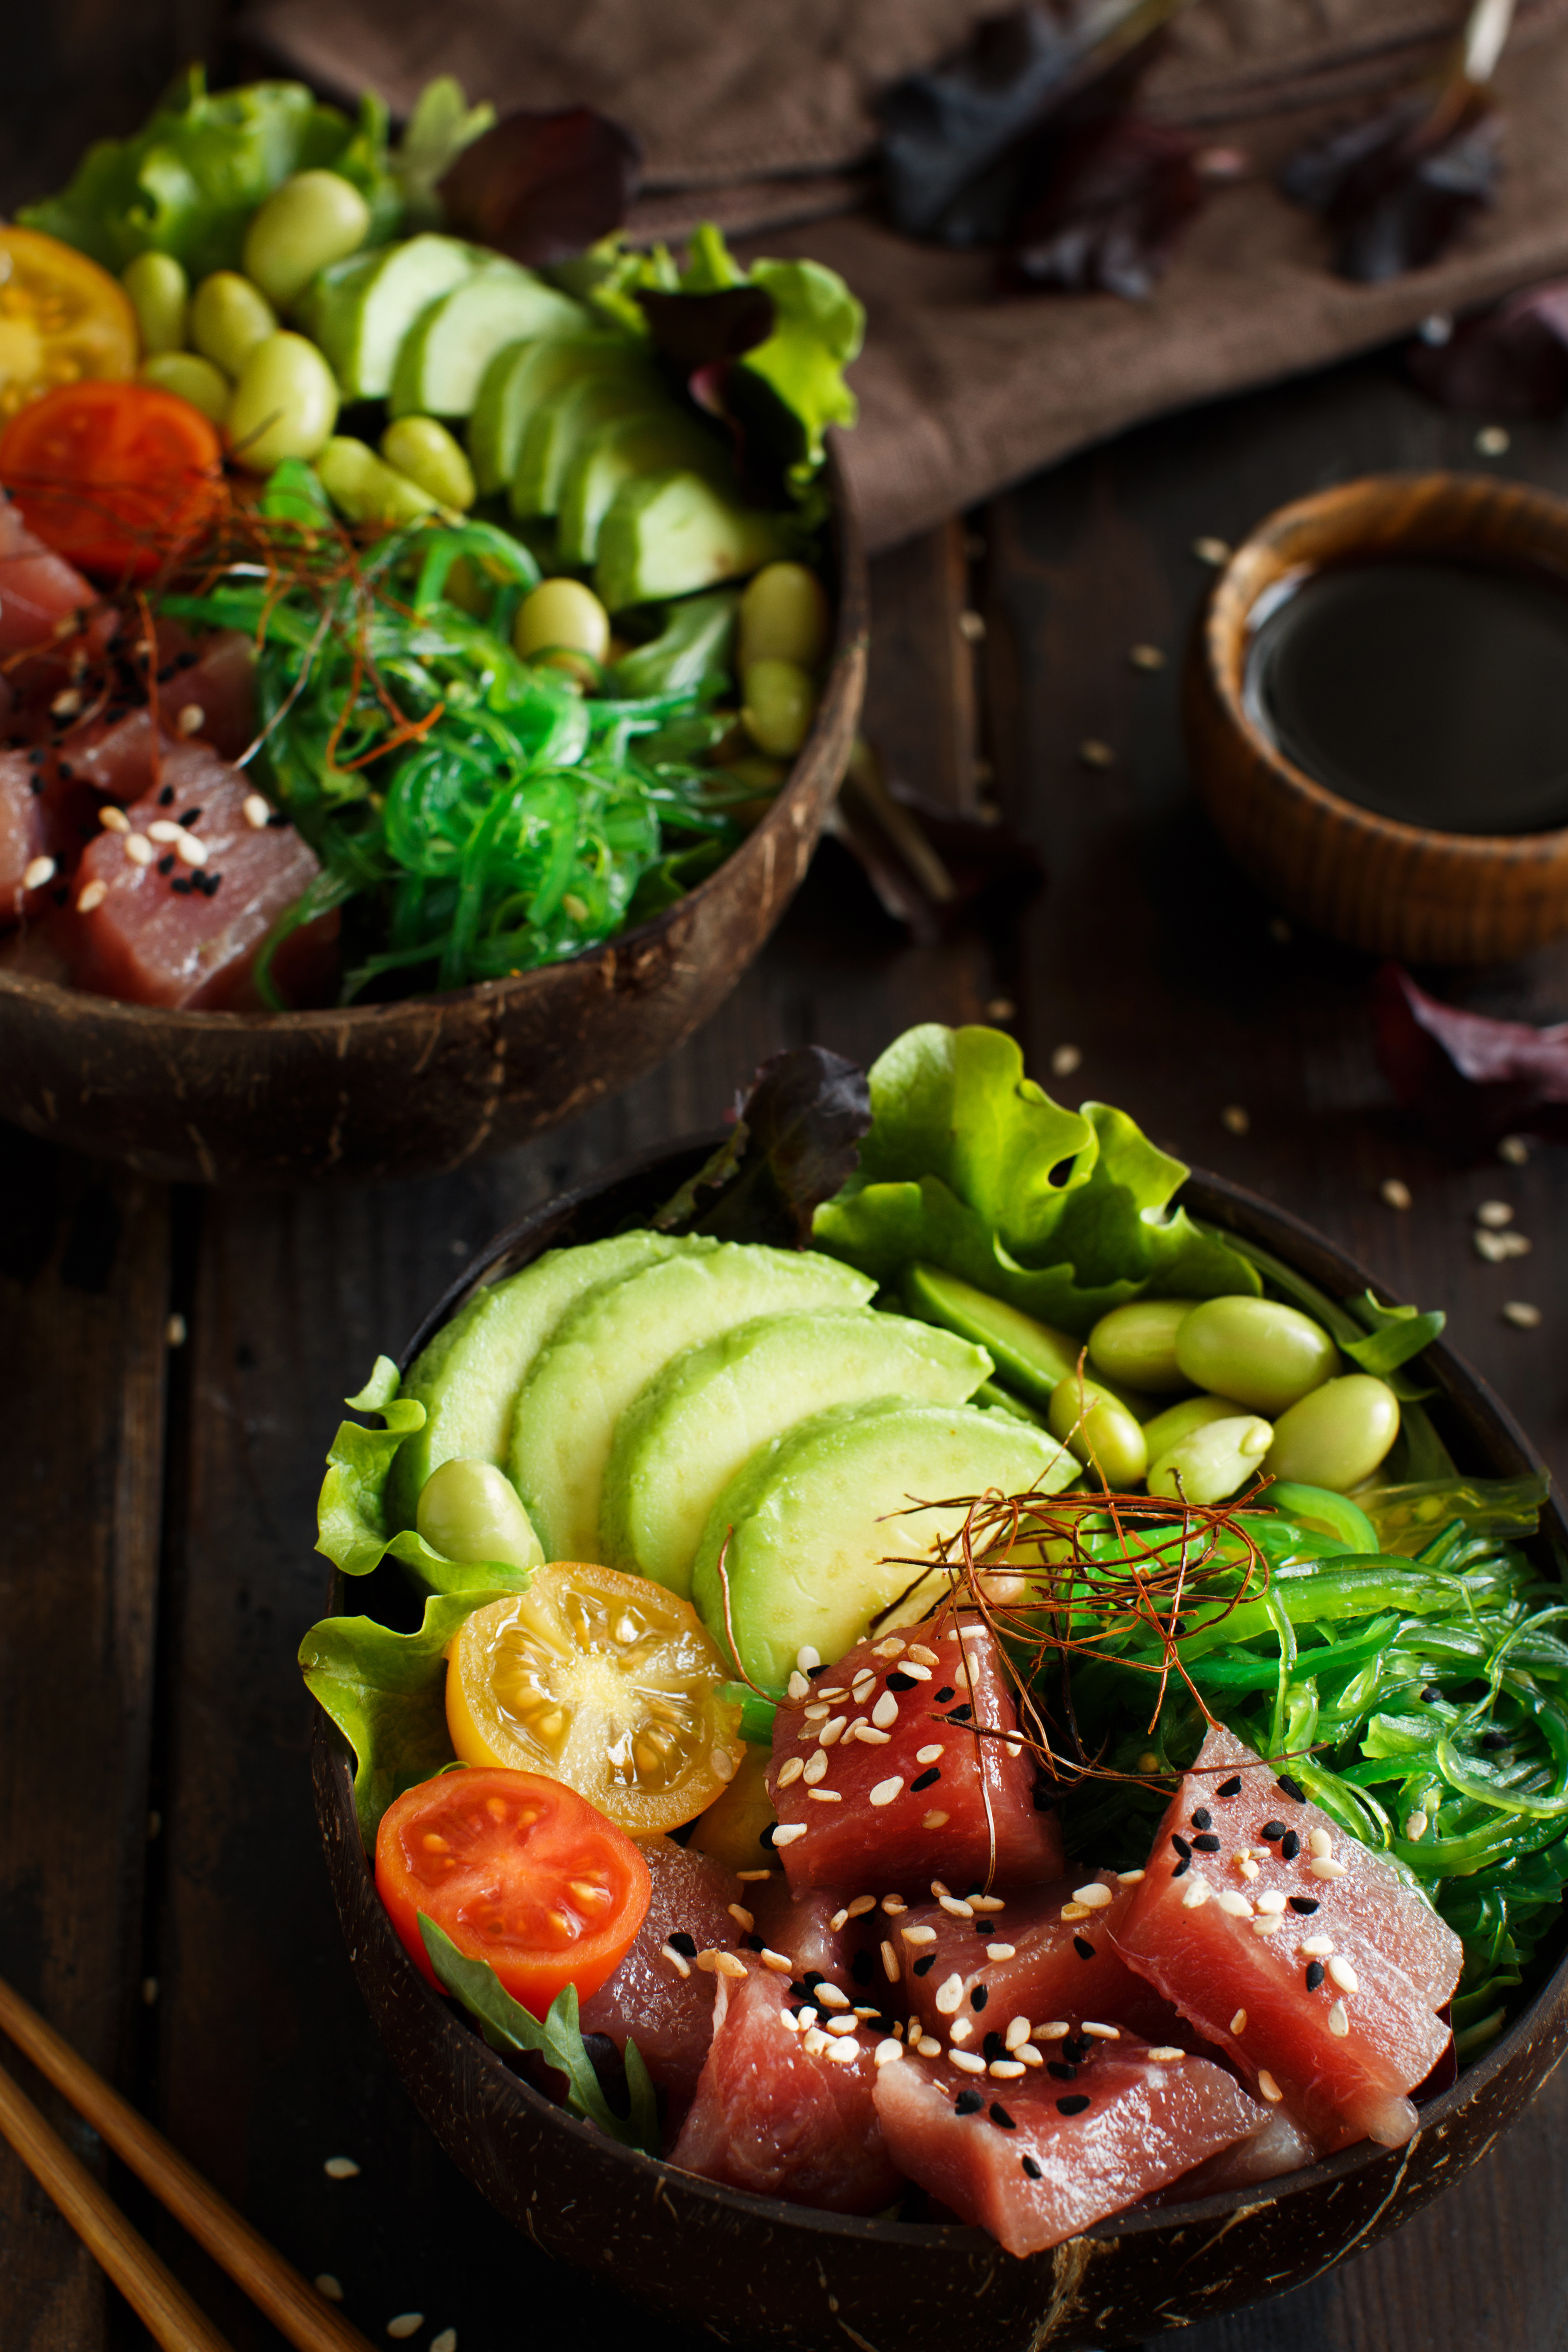 Hawaiian Poke is one of the many foods to try while traveling to Hawaii